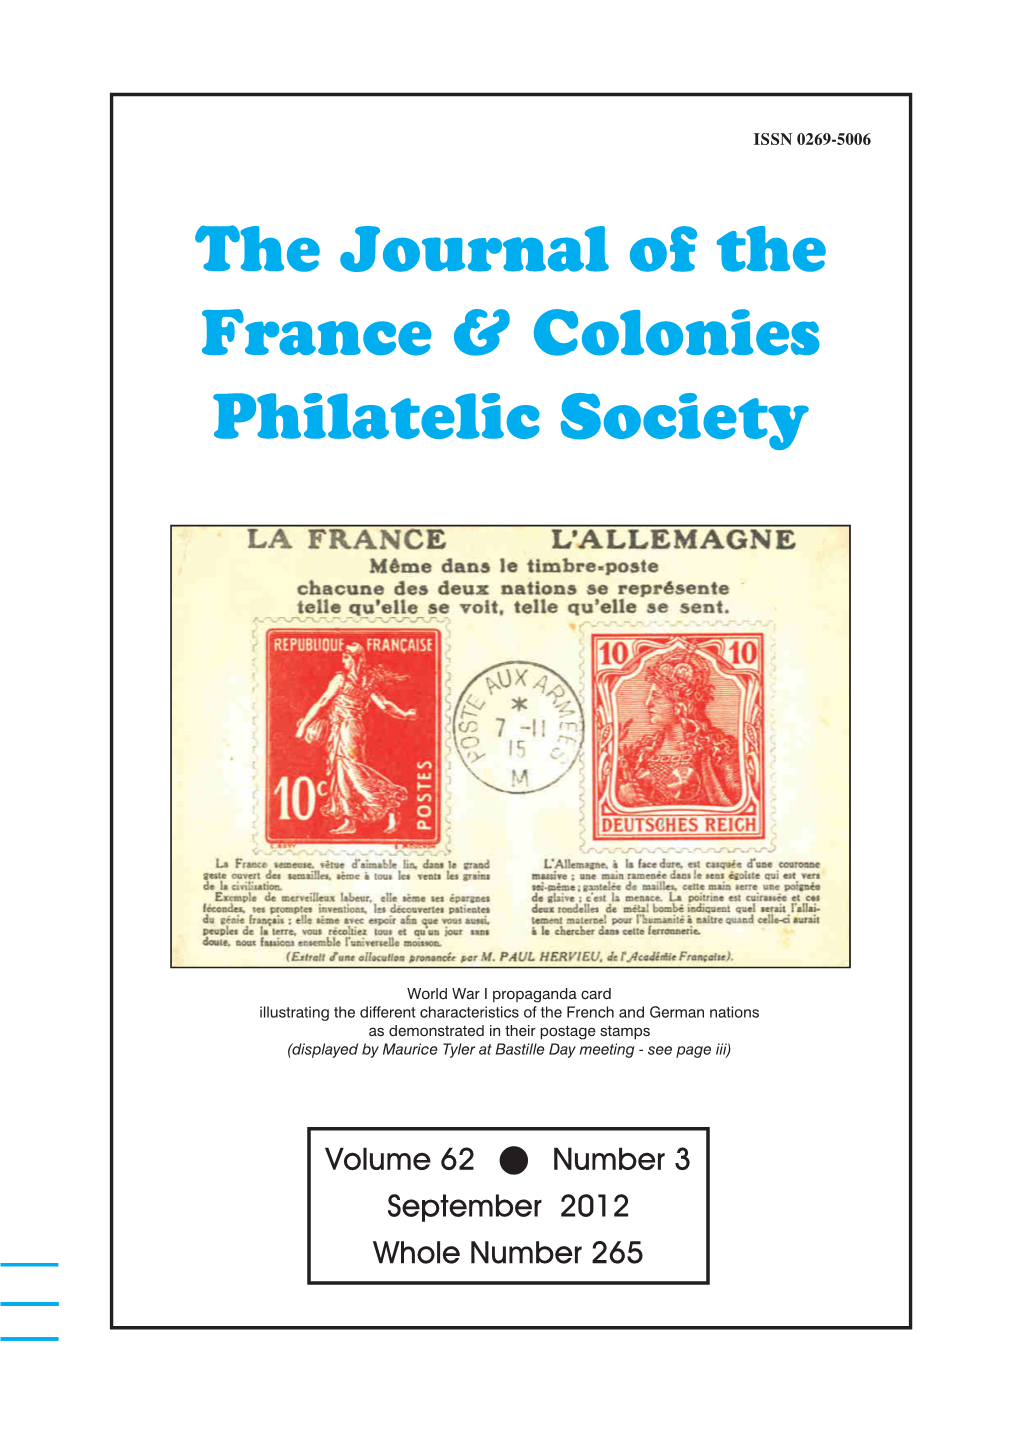 The Journal of the France & Colonies Philatelic Society